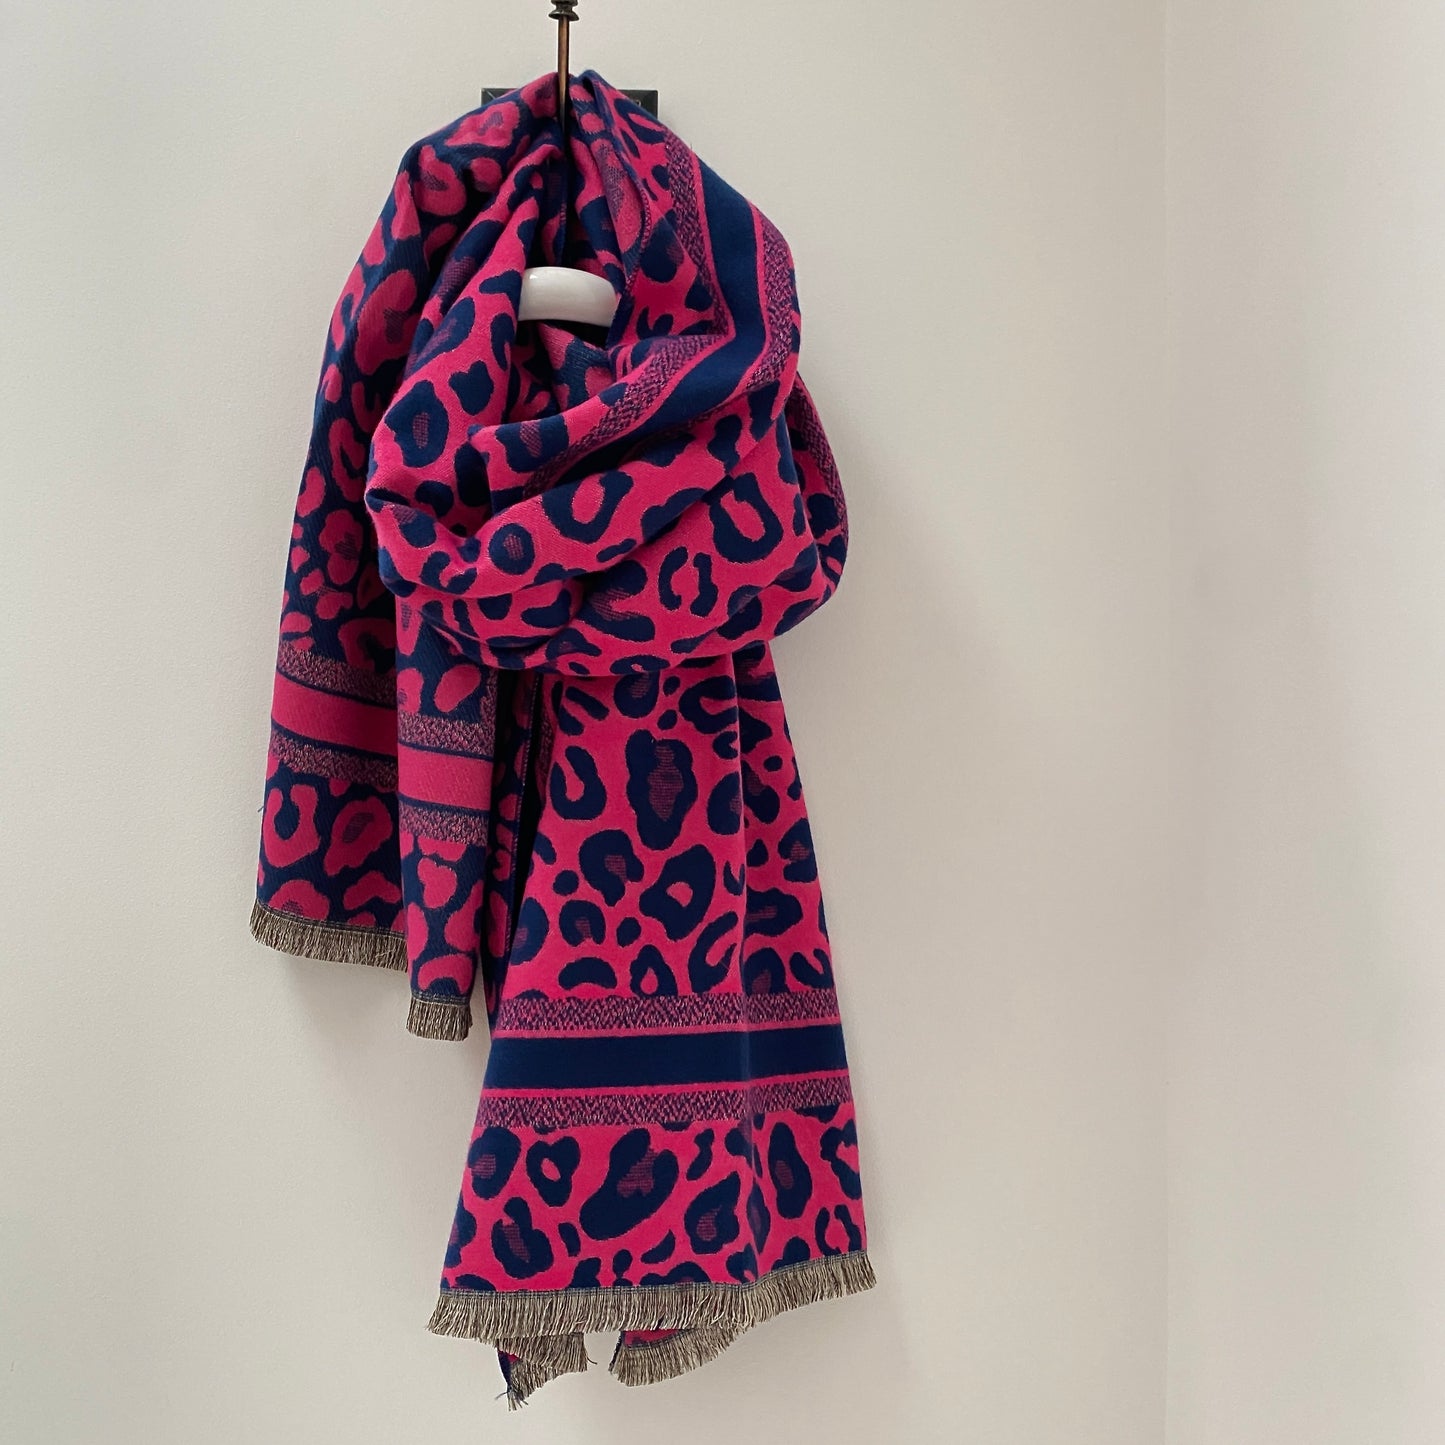 PINK LEOPARD PRINT PATTERN WOMENS SCARF      Navy and Pink Leopard print scarf     Super soft fabric     Border print detail      Frayed ends     Measures 70" long x 27" wide     80% Viscose 20% Wool     Available in Black and Green